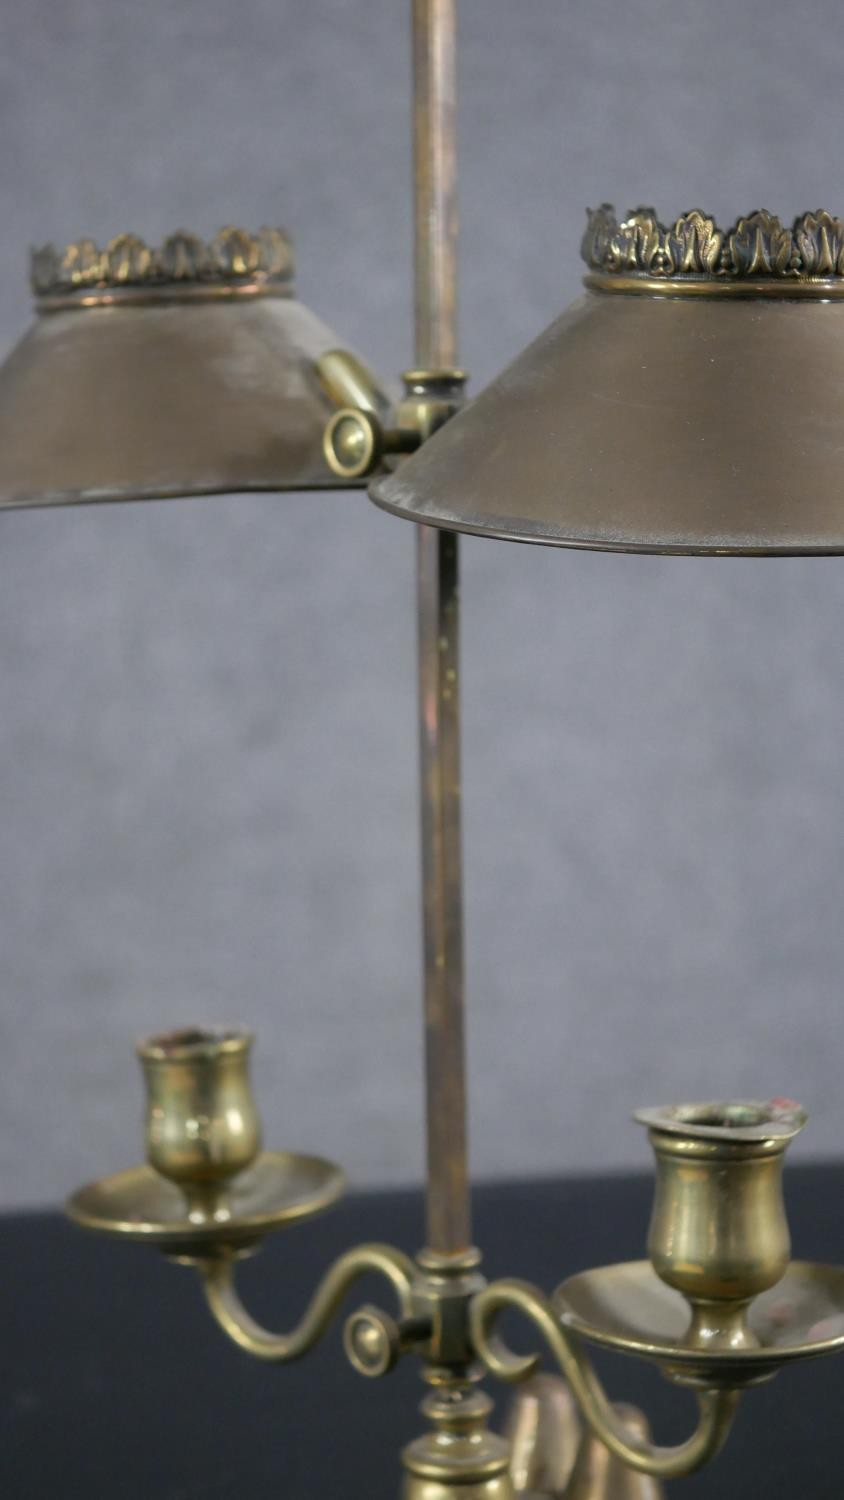 A 19th century brass double rise and fall student's candle lamp with scrolled arm supports. H.49 W. - Image 7 of 8